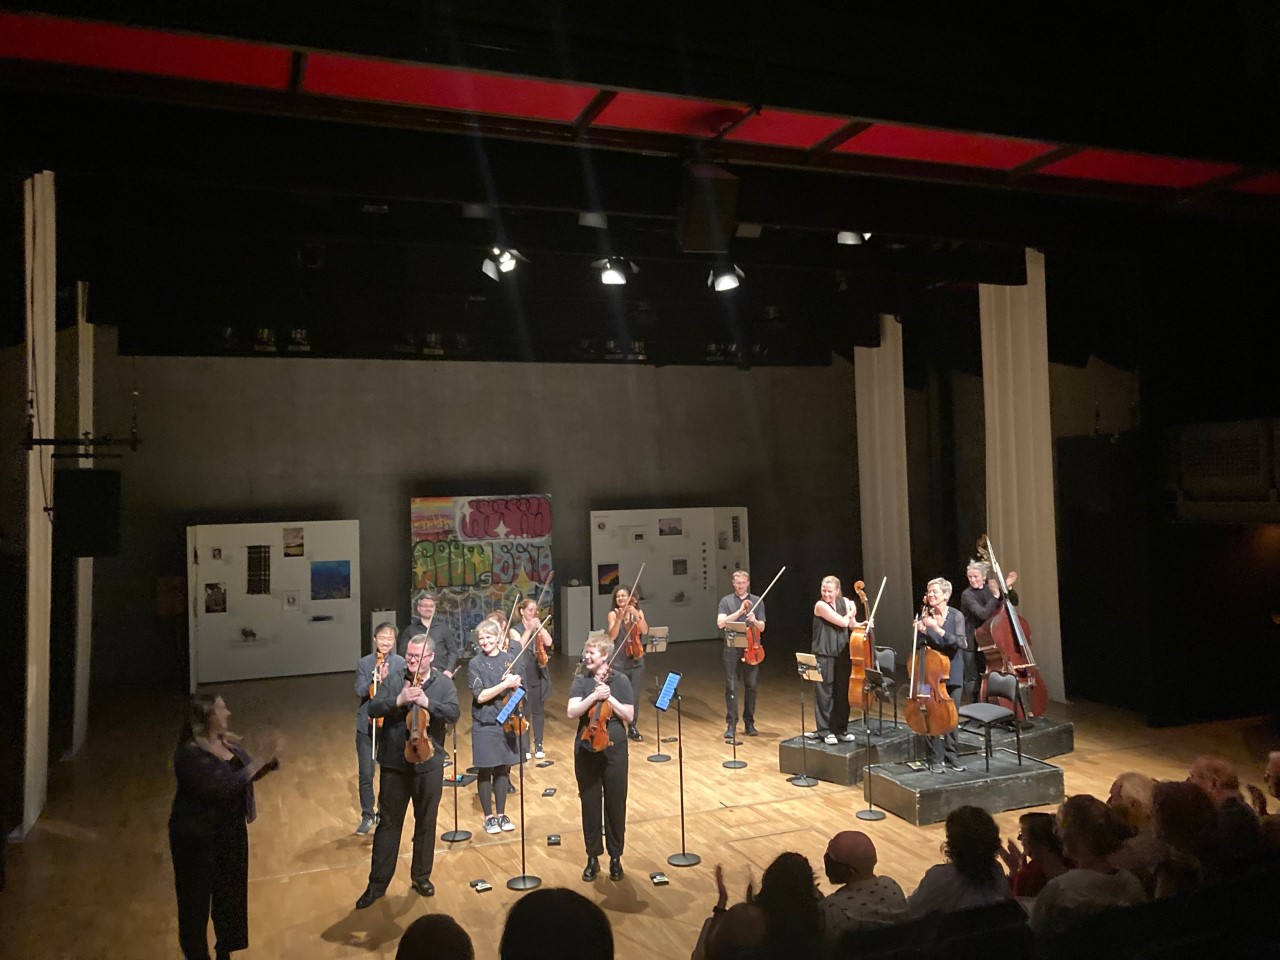 Scottish Ensemble accepting applause on stage